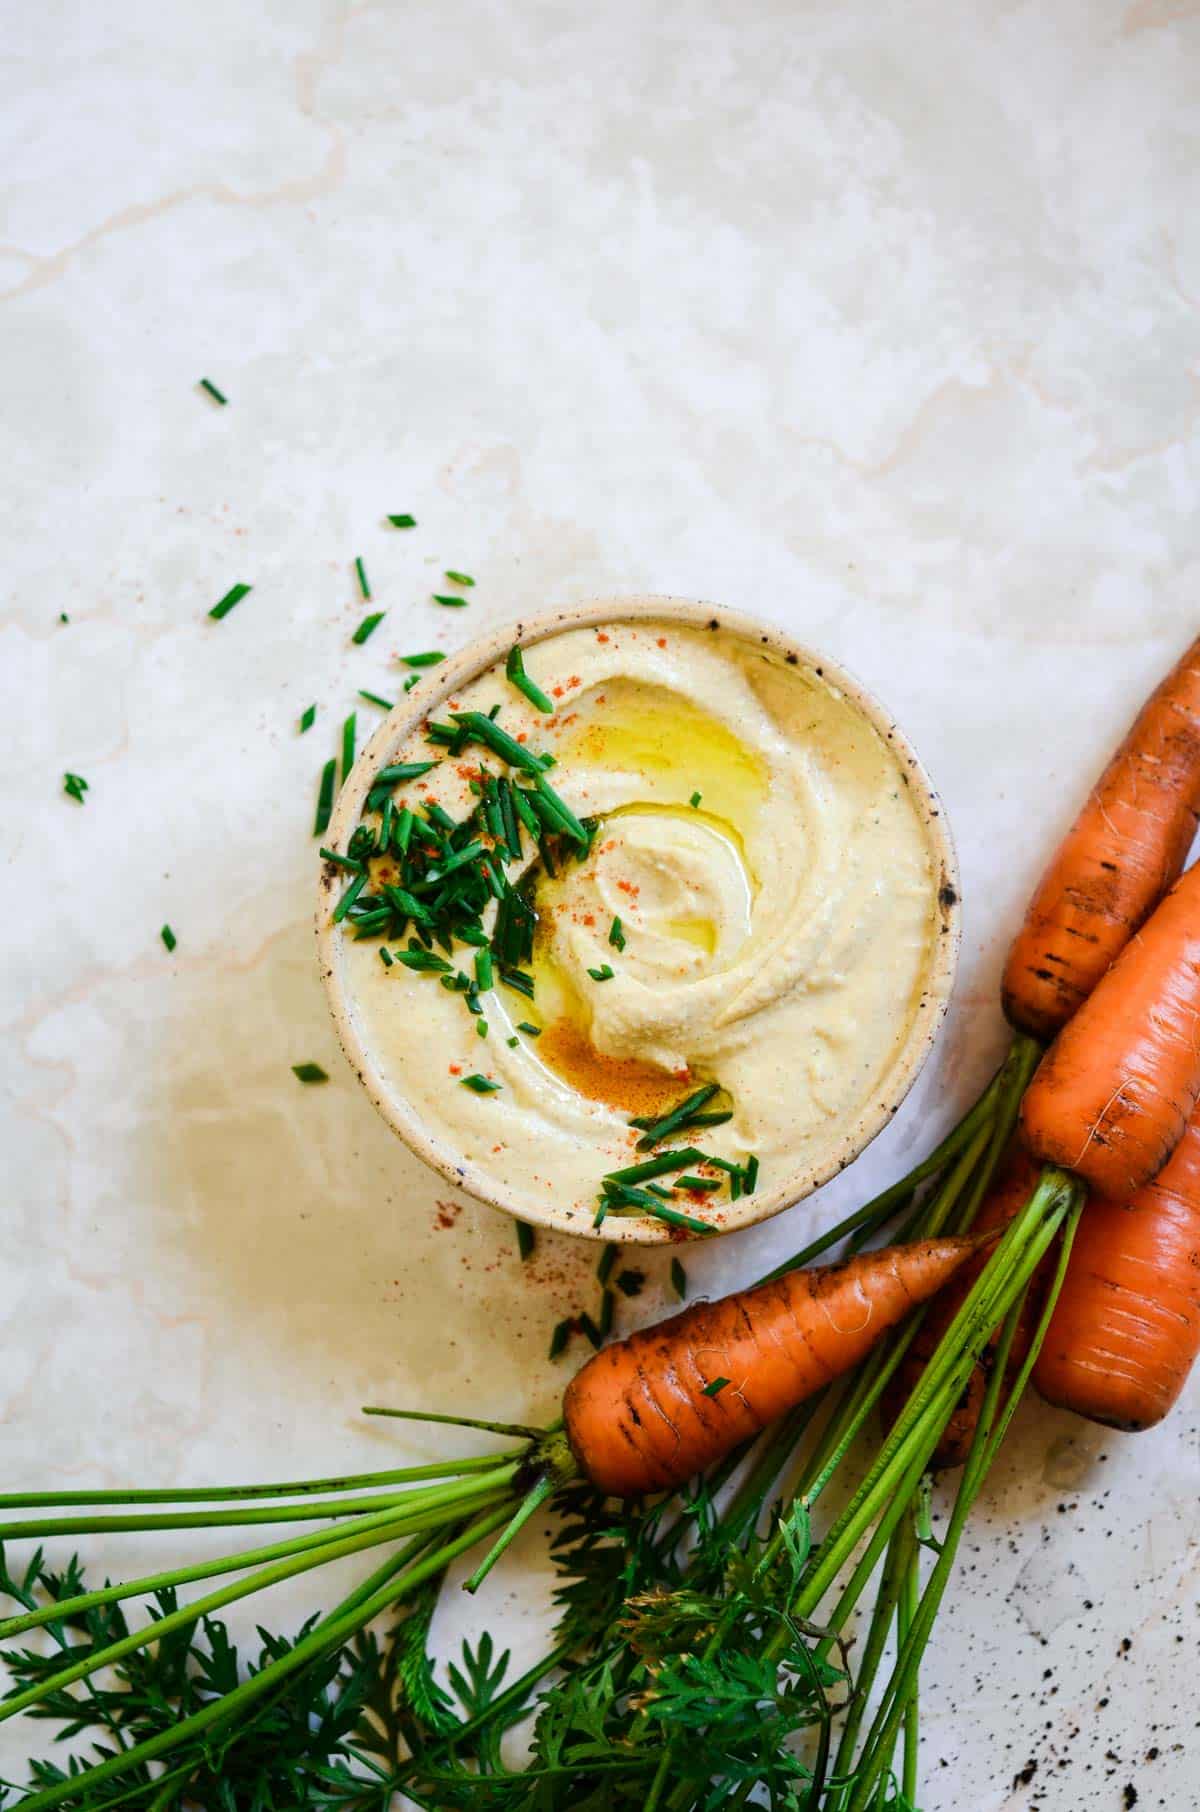 A bowl of light brown hummus with chives and oil on top, and fresh carrots with greens attached beside.